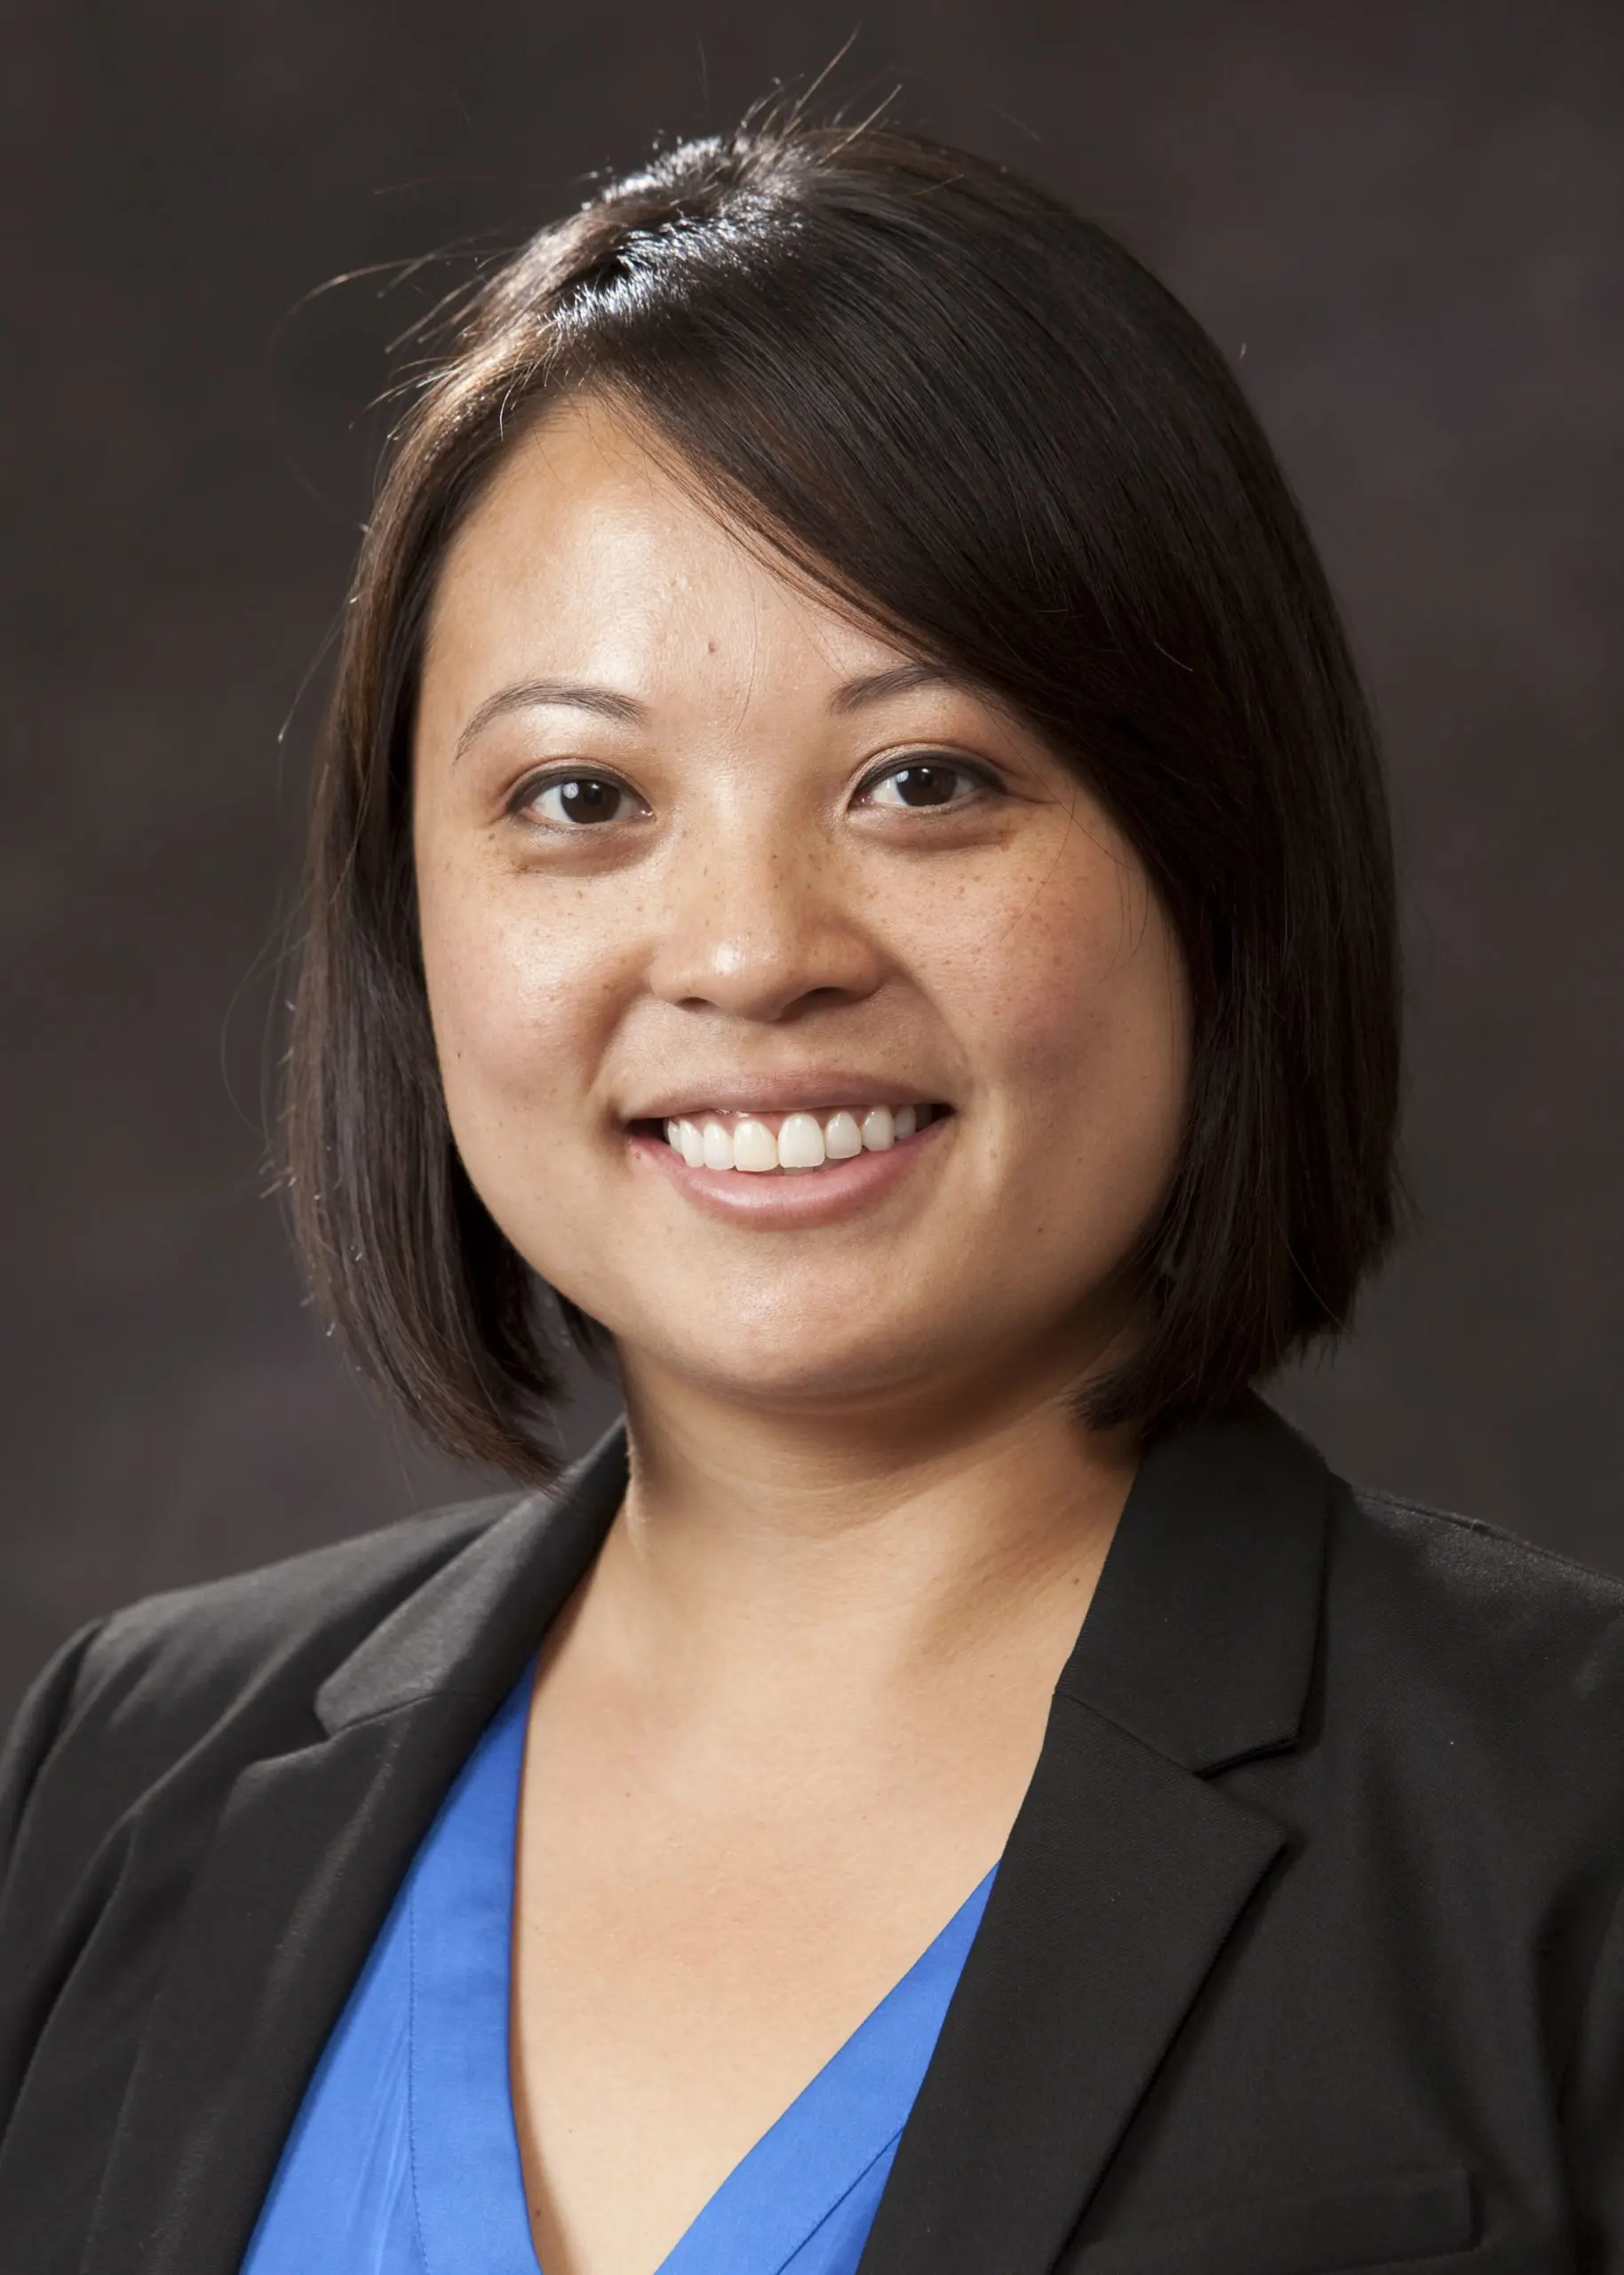 NJRetina is proud to welcome our newest associate Marisa Lau, MD